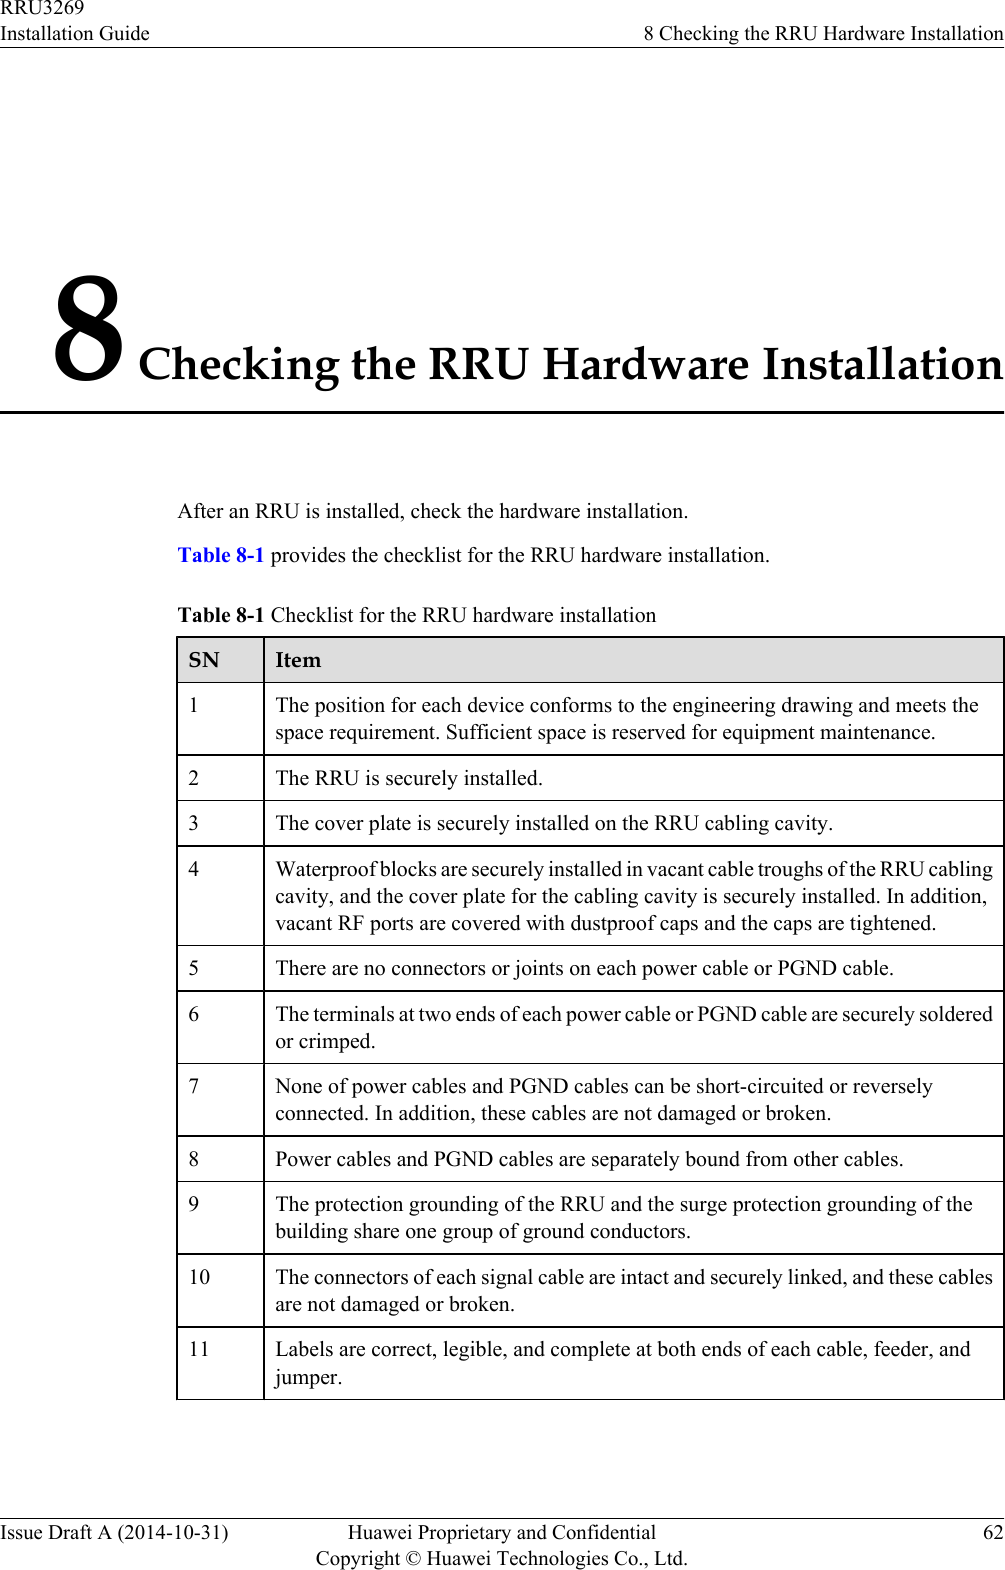 8 Checking the RRU Hardware InstallationAfter an RRU is installed, check the hardware installation.Table 8-1 provides the checklist for the RRU hardware installation.Table 8-1 Checklist for the RRU hardware installationSN Item1The position for each device conforms to the engineering drawing and meets thespace requirement. Sufficient space is reserved for equipment maintenance.2 The RRU is securely installed.3 The cover plate is securely installed on the RRU cabling cavity.4 Waterproof blocks are securely installed in vacant cable troughs of the RRU cablingcavity, and the cover plate for the cabling cavity is securely installed. In addition,vacant RF ports are covered with dustproof caps and the caps are tightened.5 There are no connectors or joints on each power cable or PGND cable.6 The terminals at two ends of each power cable or PGND cable are securely solderedor crimped.7 None of power cables and PGND cables can be short-circuited or reverselyconnected. In addition, these cables are not damaged or broken.8 Power cables and PGND cables are separately bound from other cables.9 The protection grounding of the RRU and the surge protection grounding of thebuilding share one group of ground conductors.10 The connectors of each signal cable are intact and securely linked, and these cablesare not damaged or broken.11 Labels are correct, legible, and complete at both ends of each cable, feeder, andjumper.RRU3269Installation Guide 8 Checking the RRU Hardware InstallationIssue Draft A (2014-10-31) Huawei Proprietary and ConfidentialCopyright © Huawei Technologies Co., Ltd.62